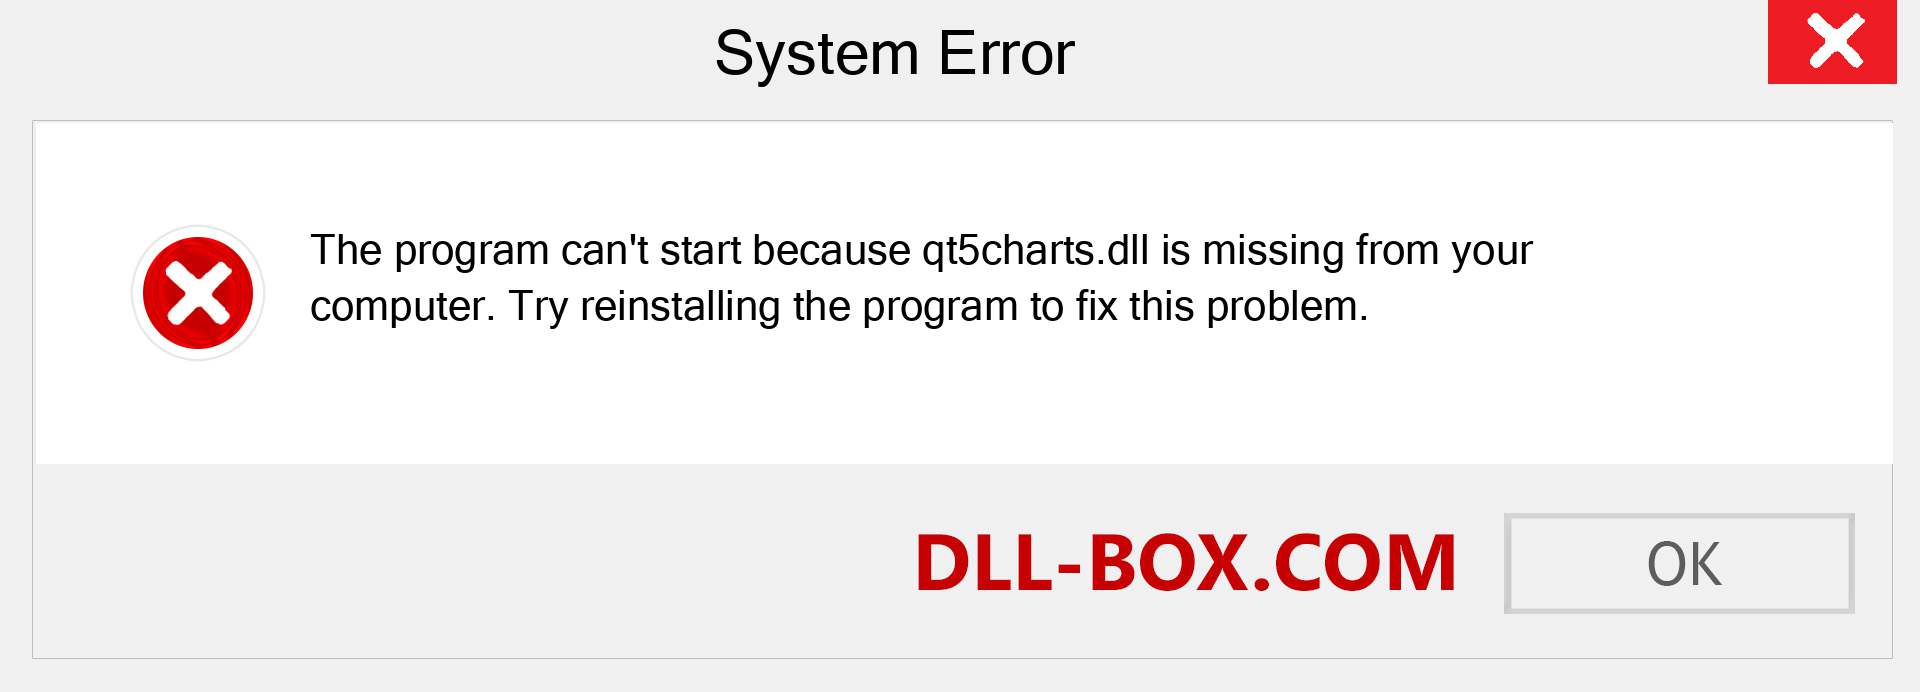  qt5charts.dll file is missing?. Download for Windows 7, 8, 10 - Fix  qt5charts dll Missing Error on Windows, photos, images